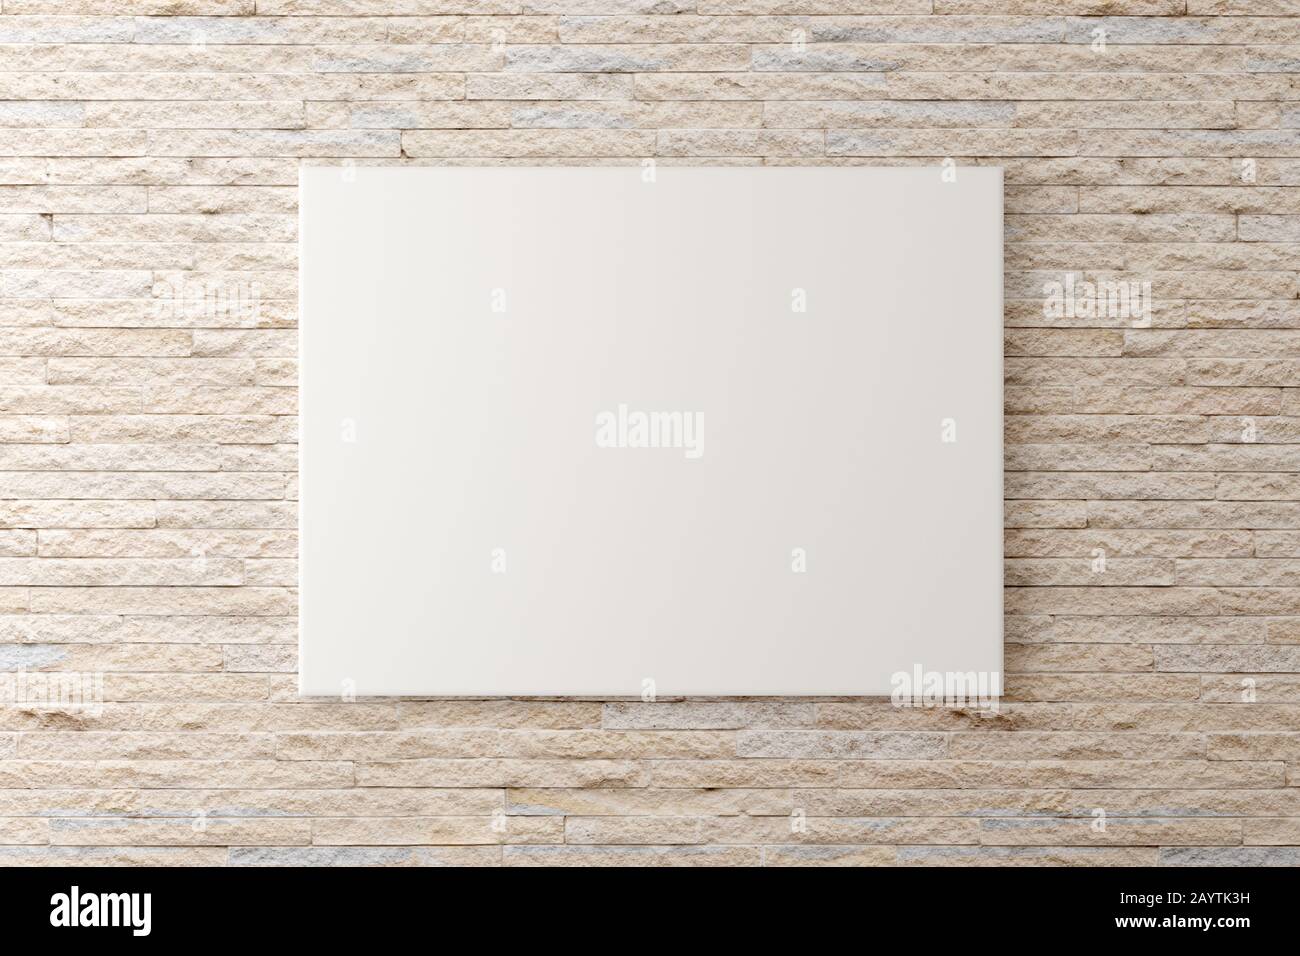 Empty picture frame canvas hanging on brick stone wall with copy space - portfolio, gallery or artwork template mock up - 3D illustration Stock Photo